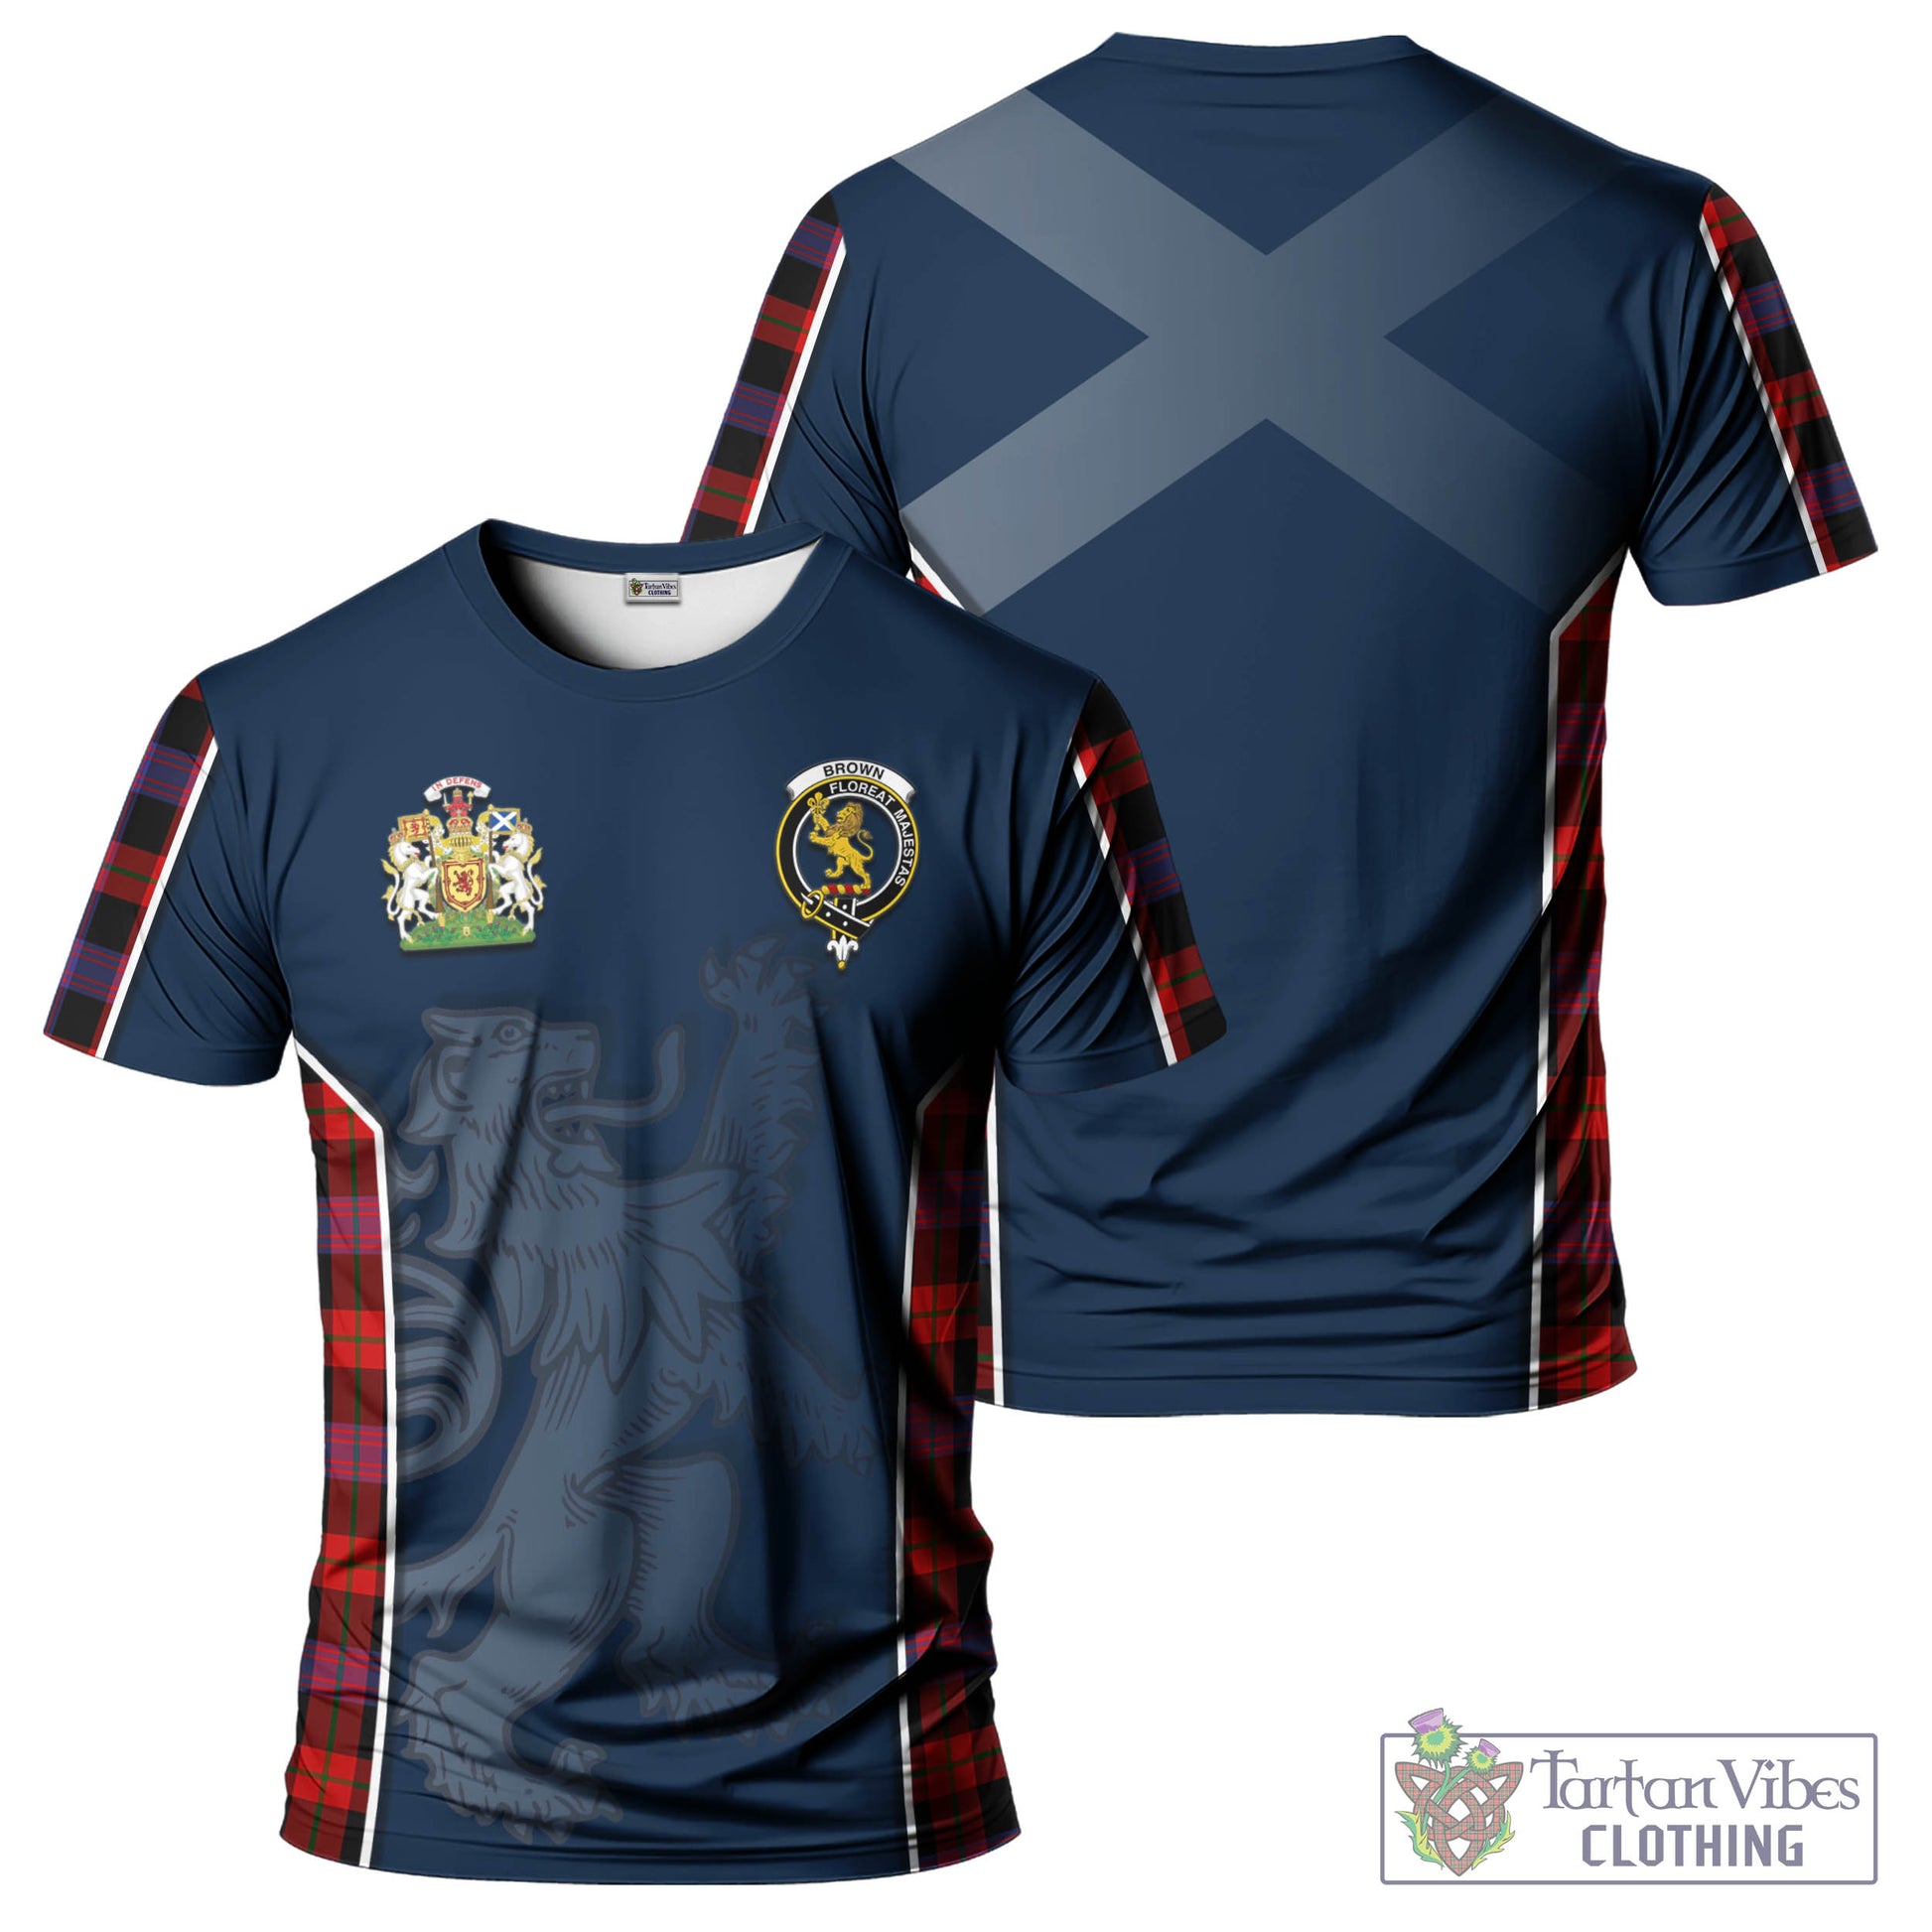 Tartan Vibes Clothing Brown Tartan T-Shirt with Family Crest and Lion Rampant Vibes Sport Style